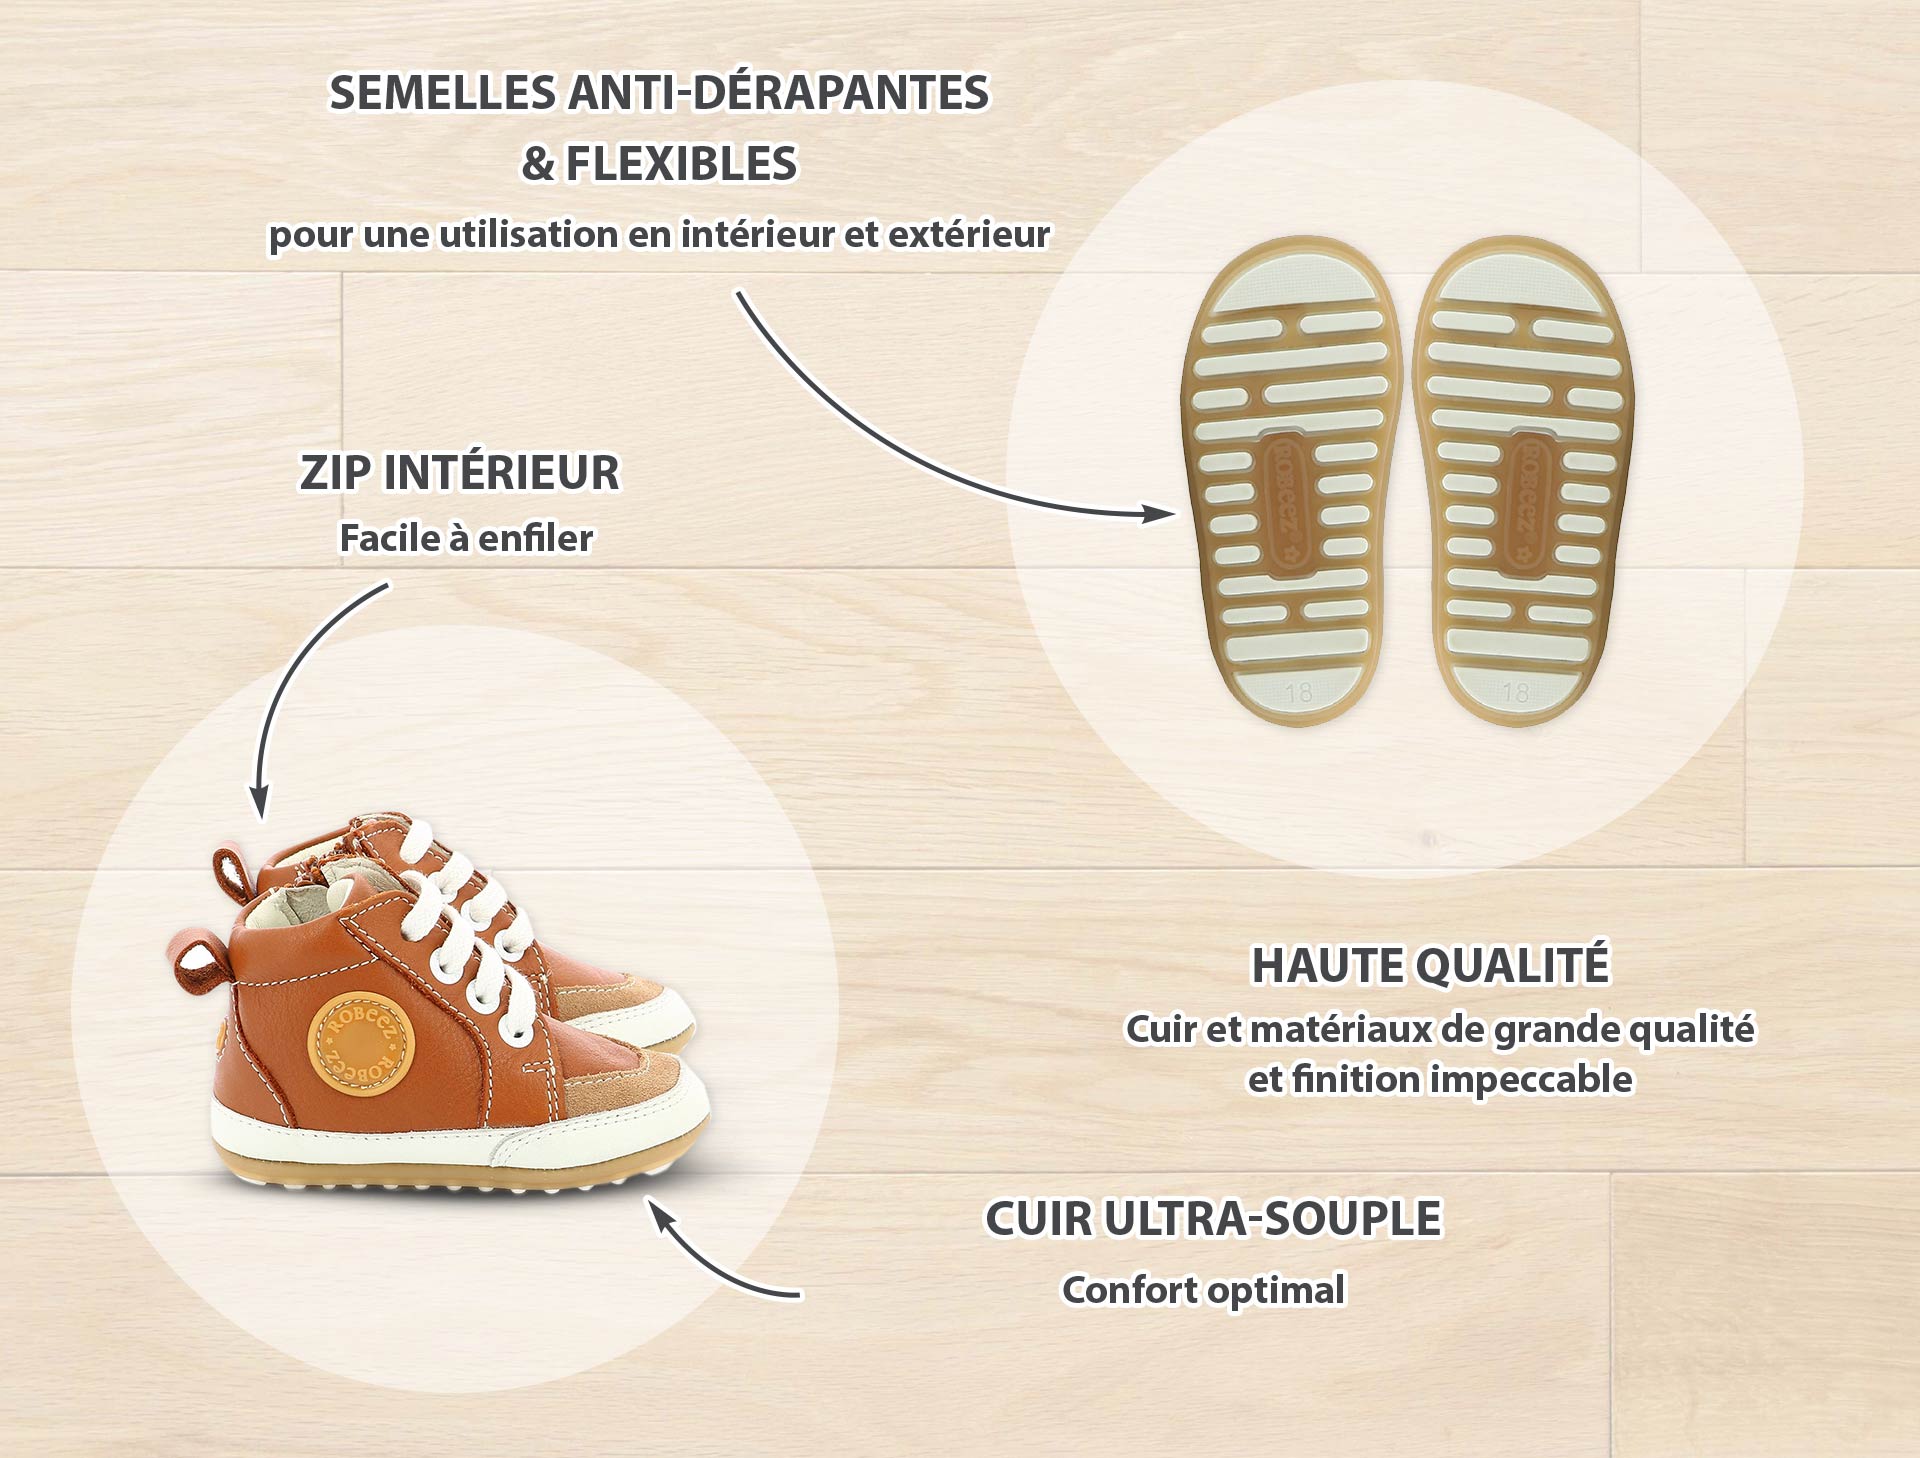 Robeez - Chaussons/chaussures 4 pattes lapin